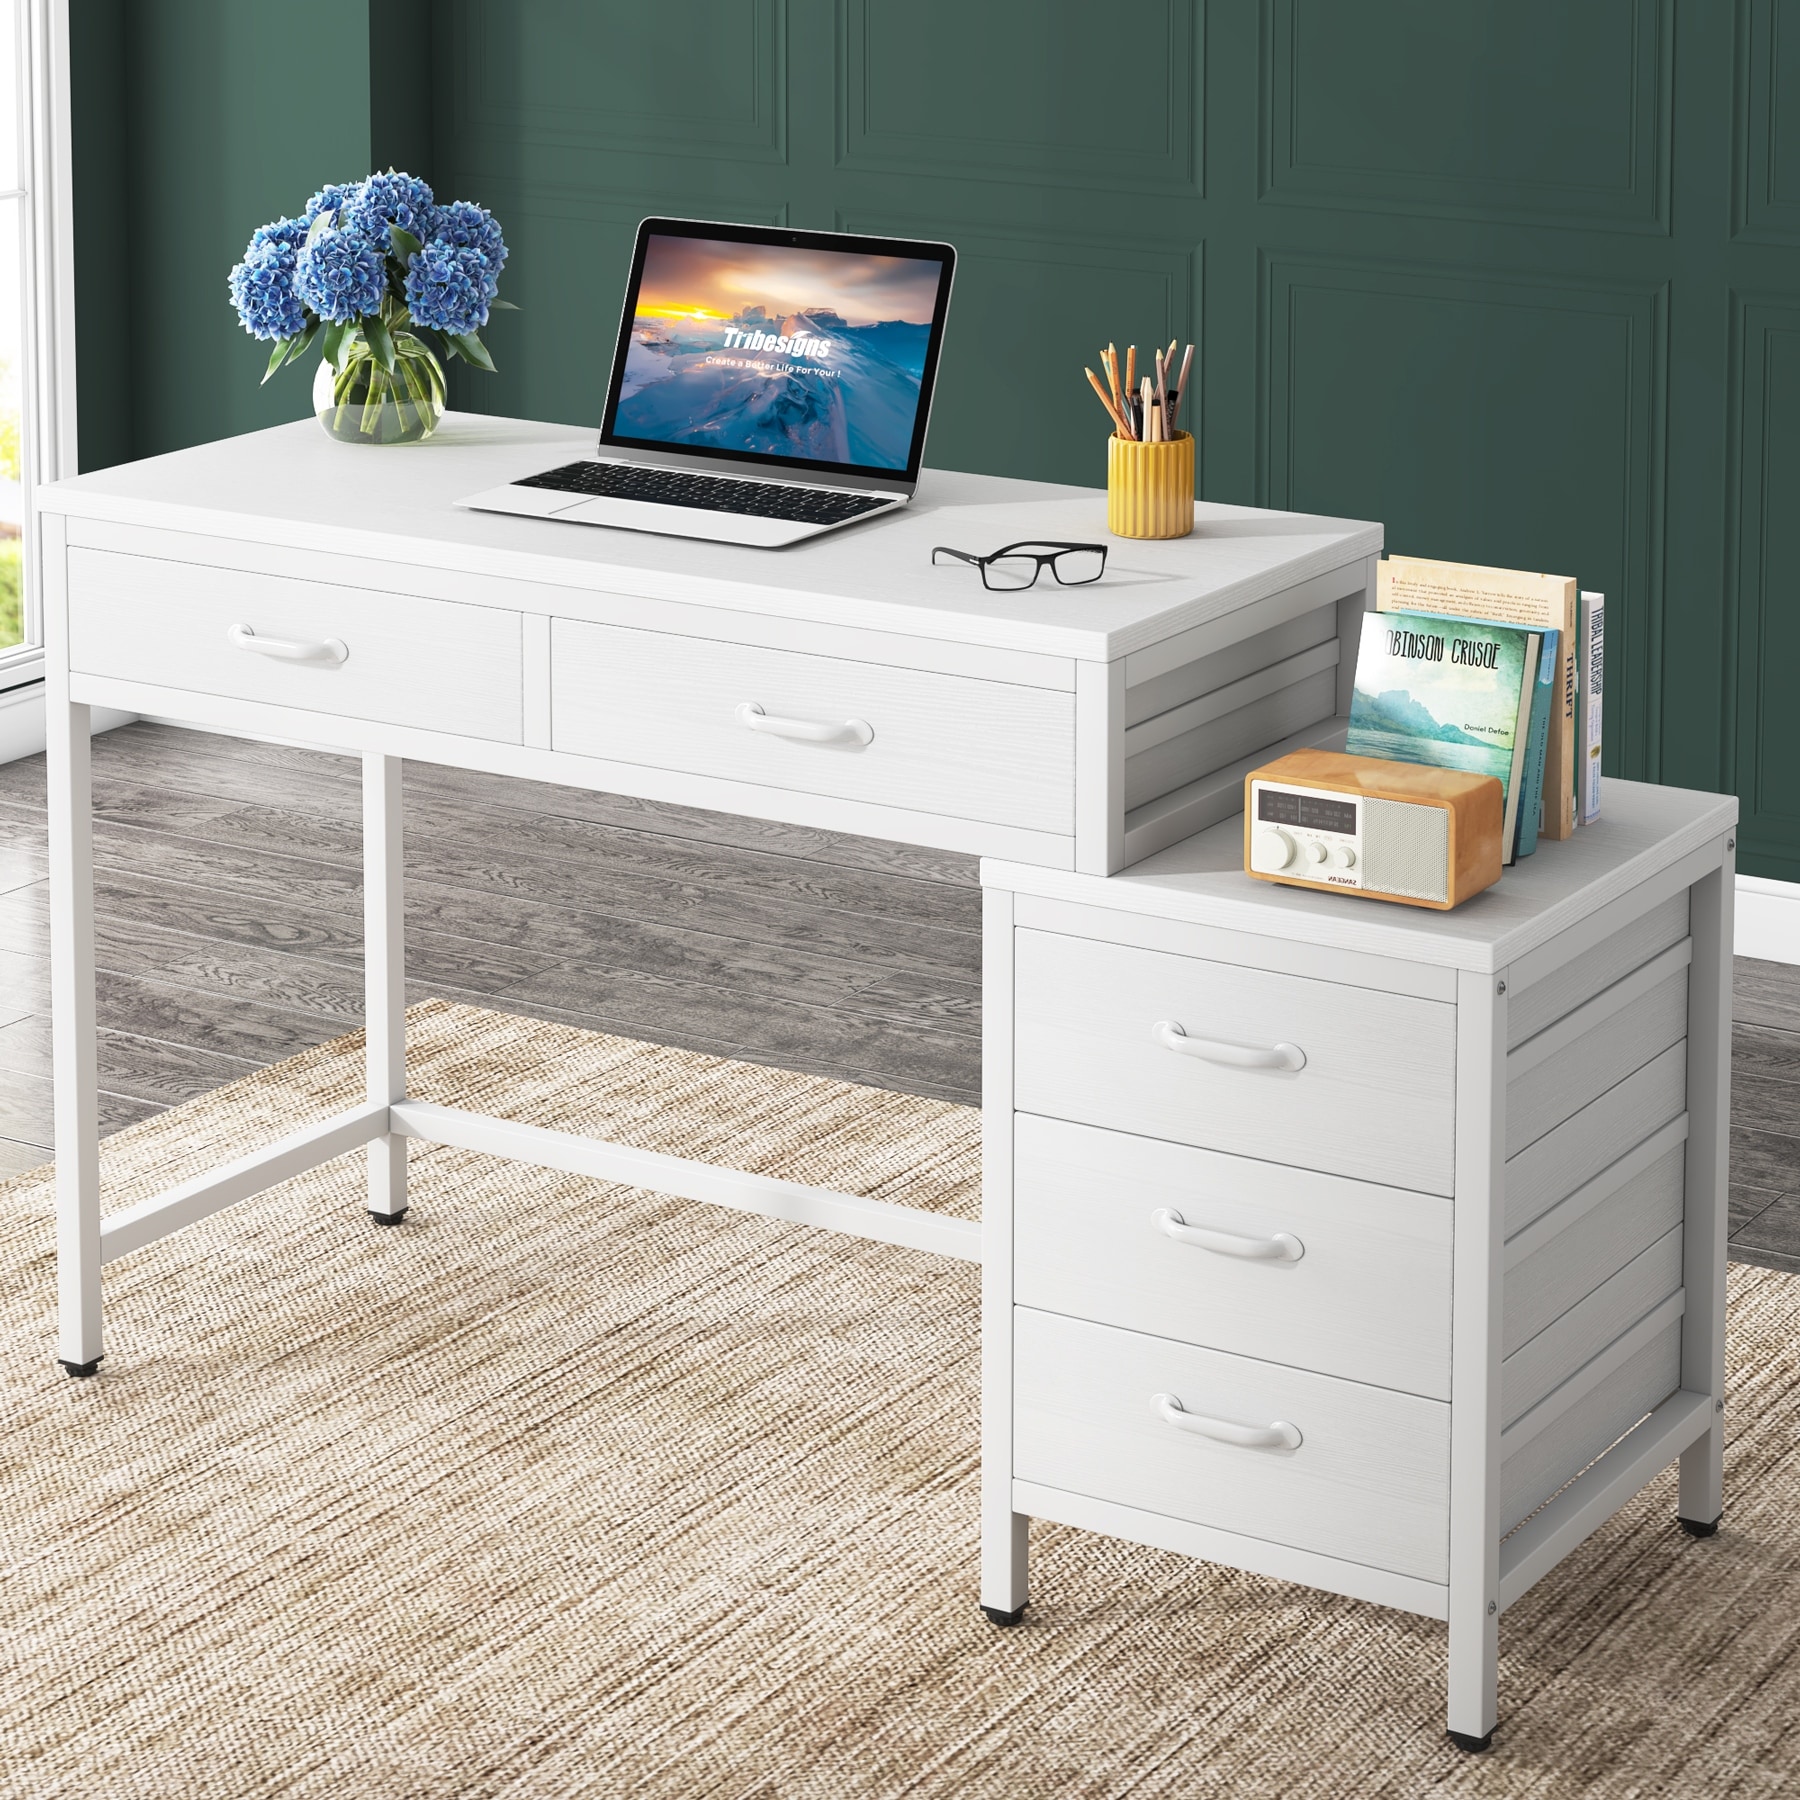 https://ak1.ostkcdn.com/images/products/is/images/direct/6df0074e05efa8ffc0cb0bd31bbca802b30da6bb/Reversible-Computer-Desk-with-5-Drawers%2C-Home-Office-Desk-with-File-Cabinet-Drawer-Printer-Stand.jpg